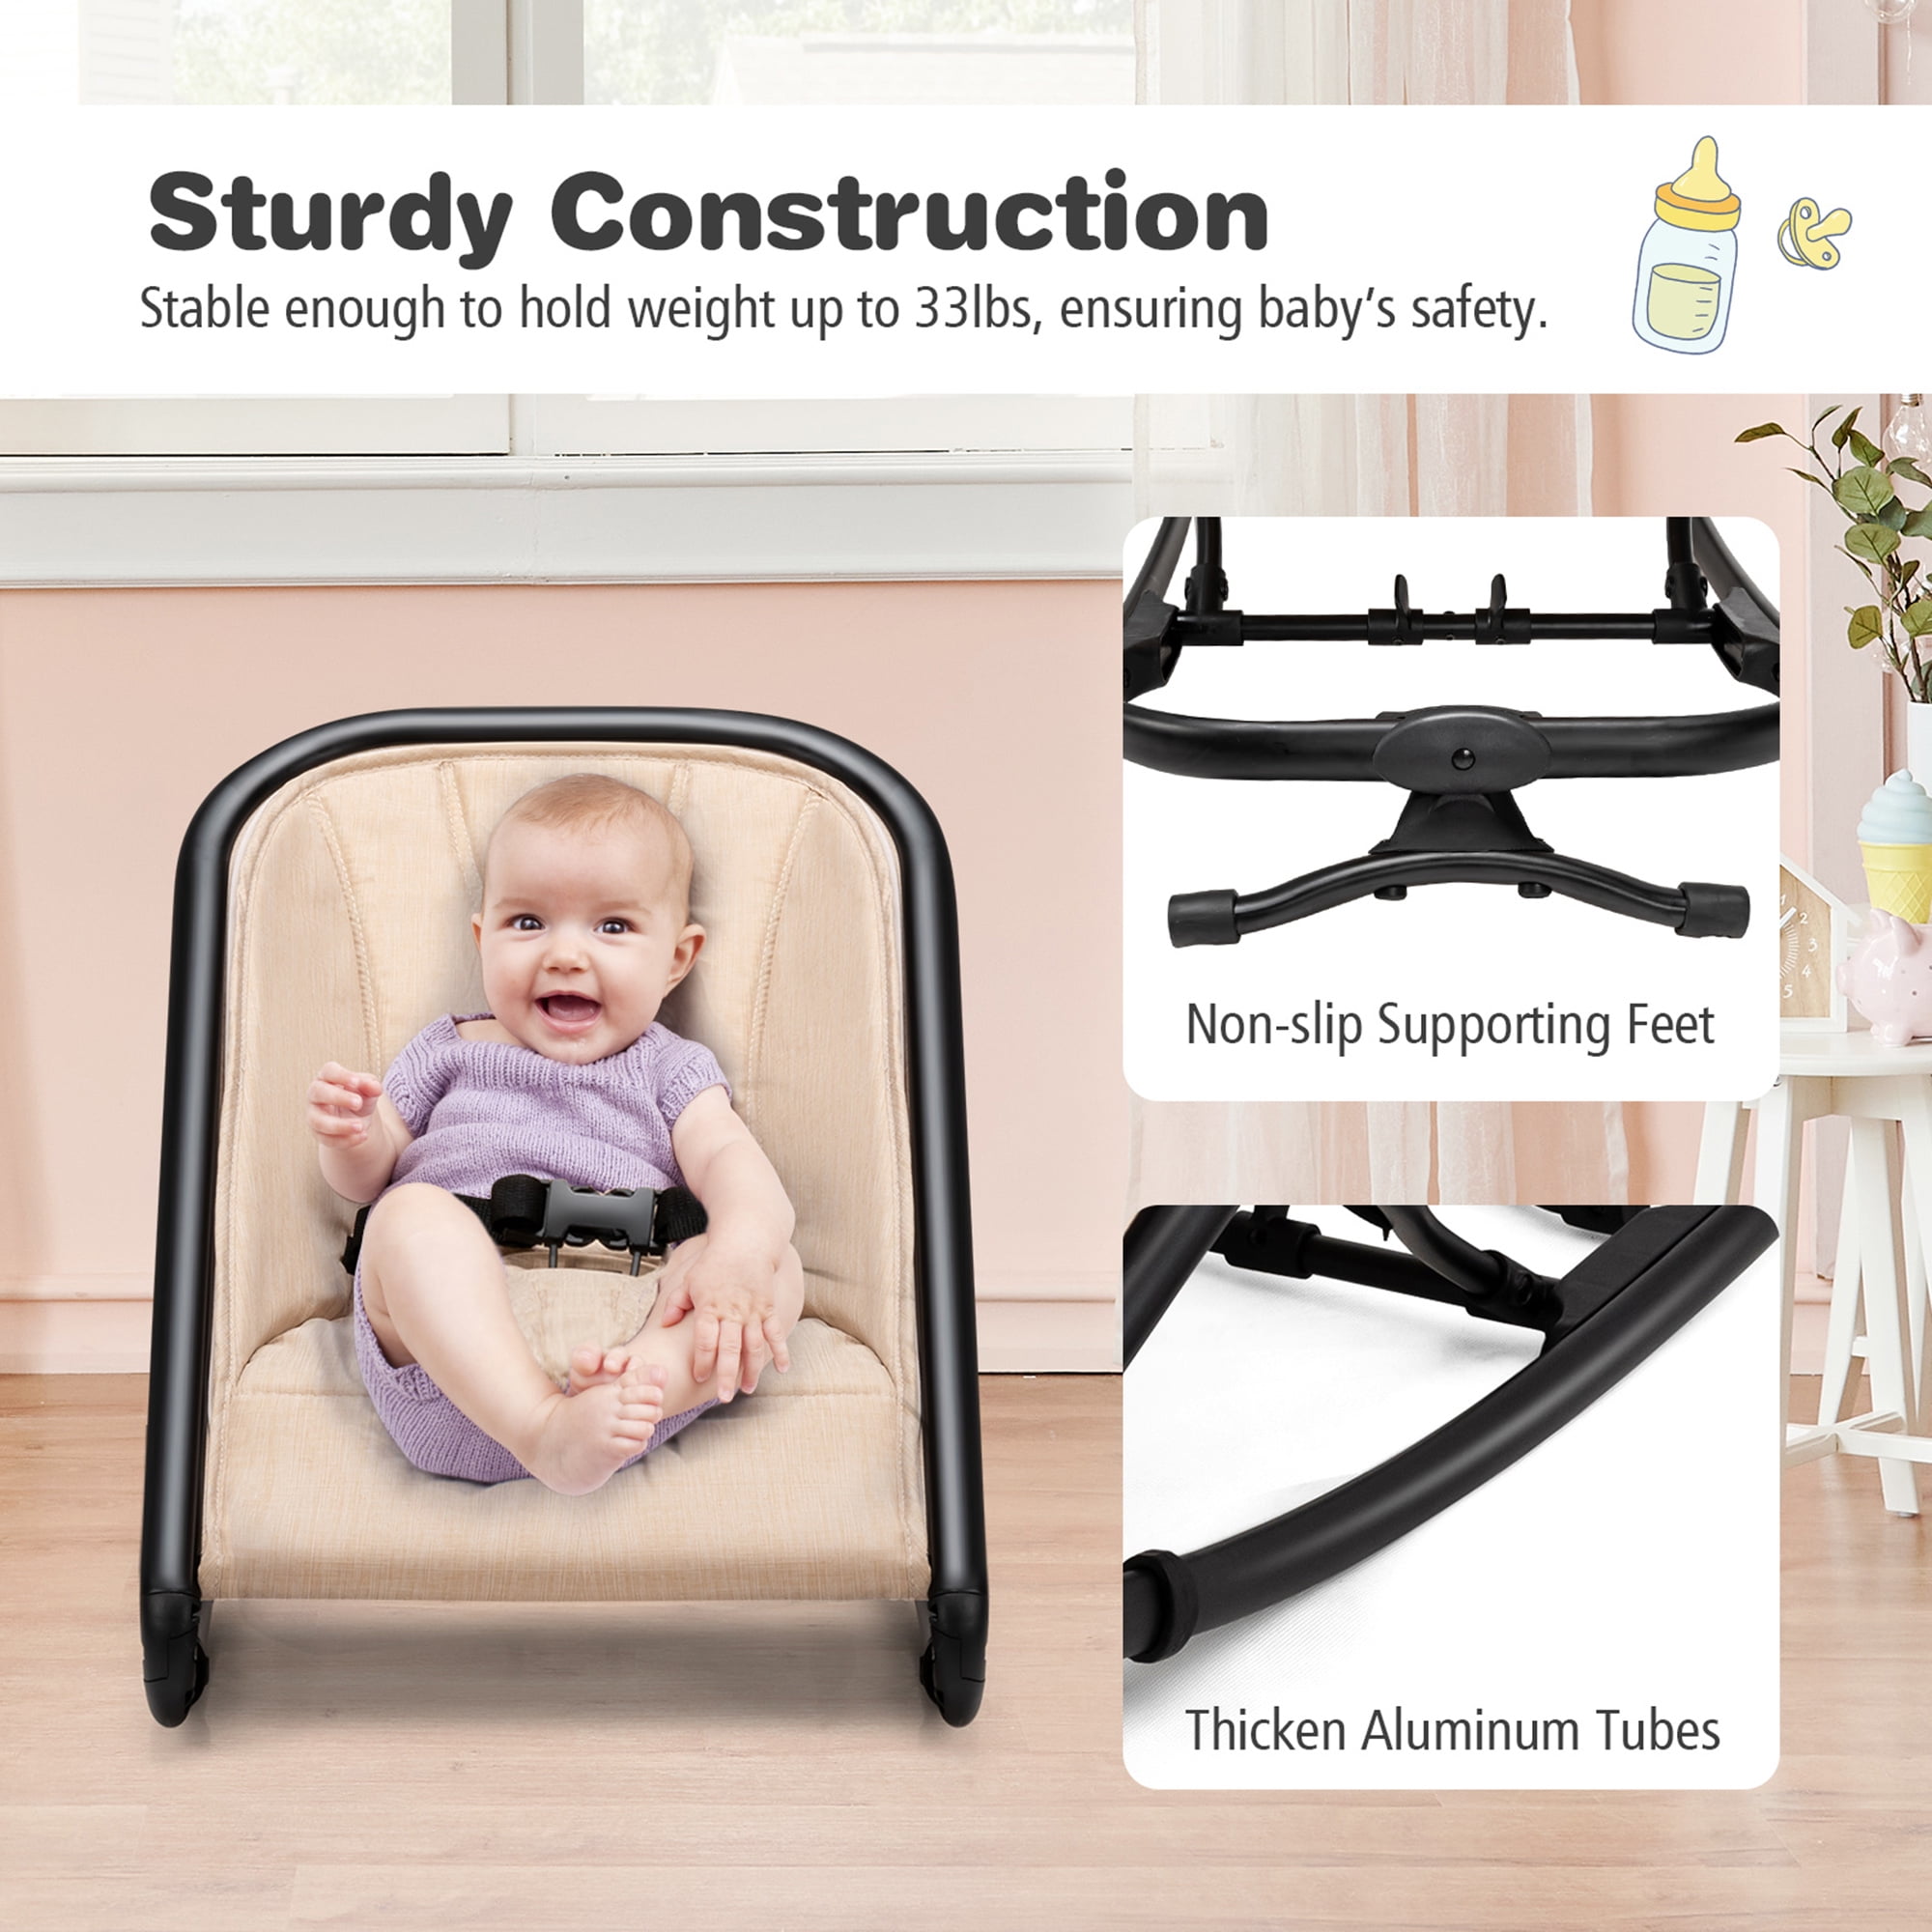 Portable Baby Bouncer Seat w/ 2 Adjustable Recline Positions BABY JOY 2 in 1 Baby Rocker Dark Gray Folding Infant Bouncer Seat w/ 2 Modes of Use for Newborn Babies 33 LBS Weight Capacity 